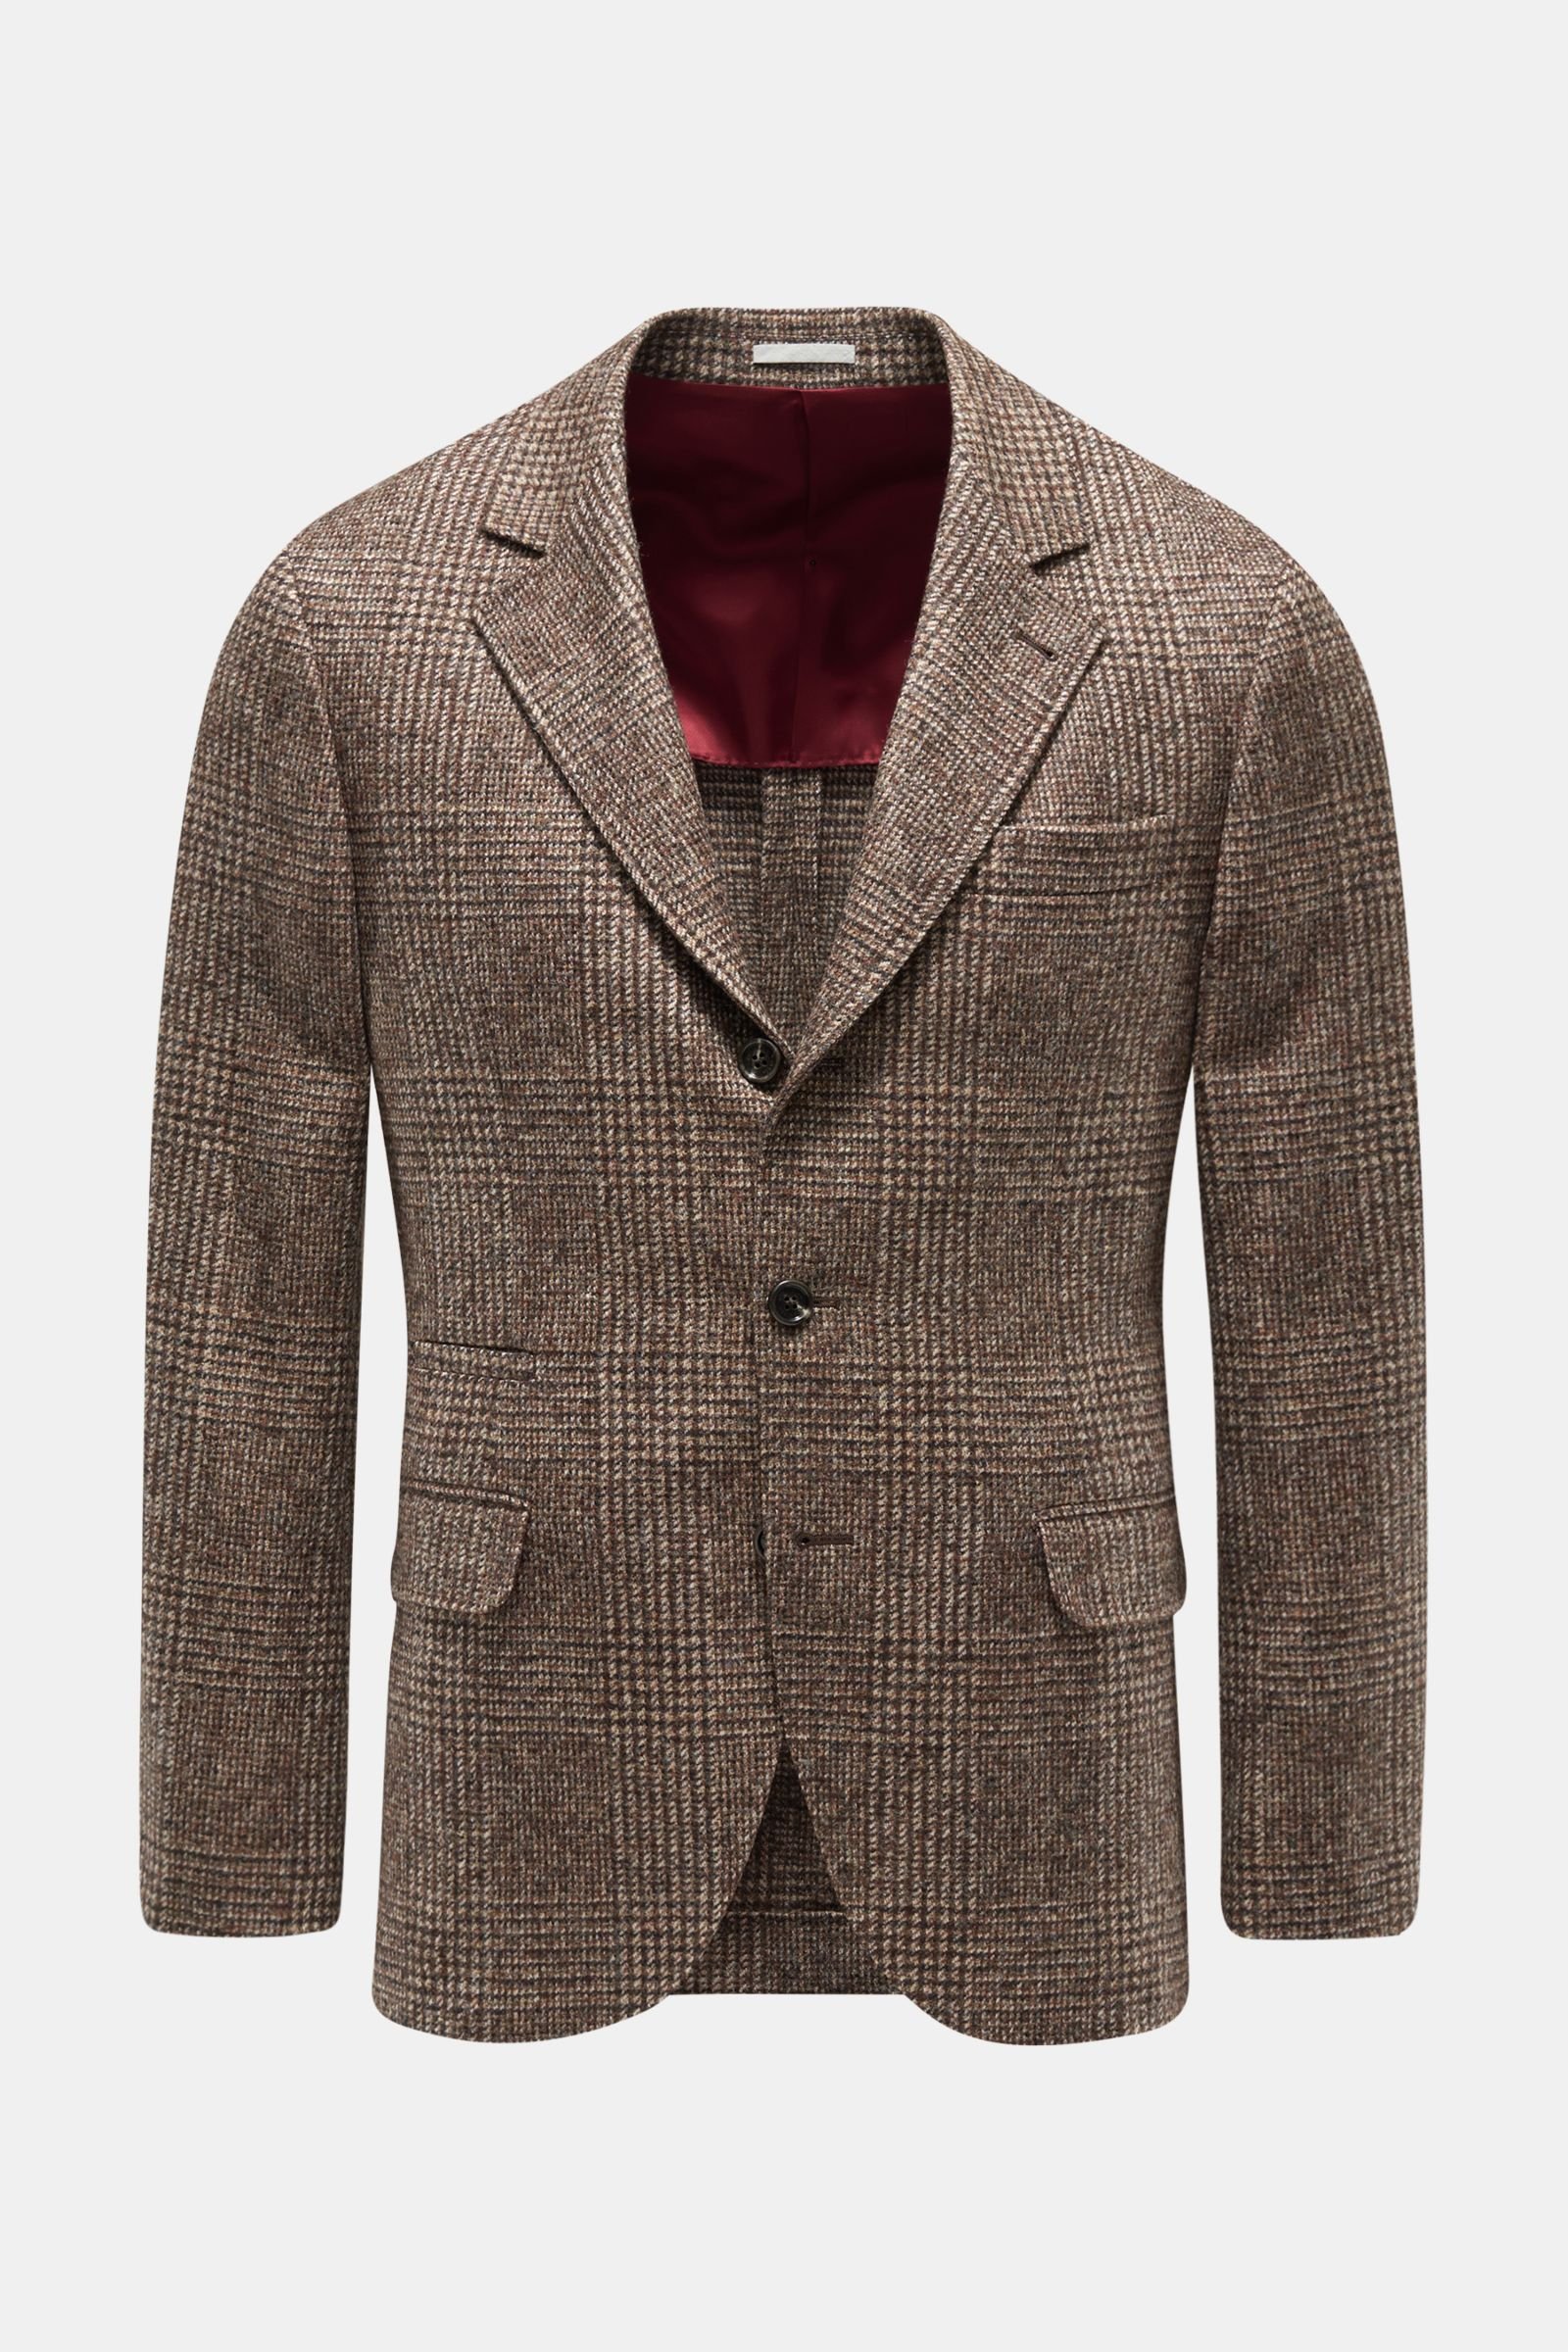 Smart-casual jacket brown/beige checked